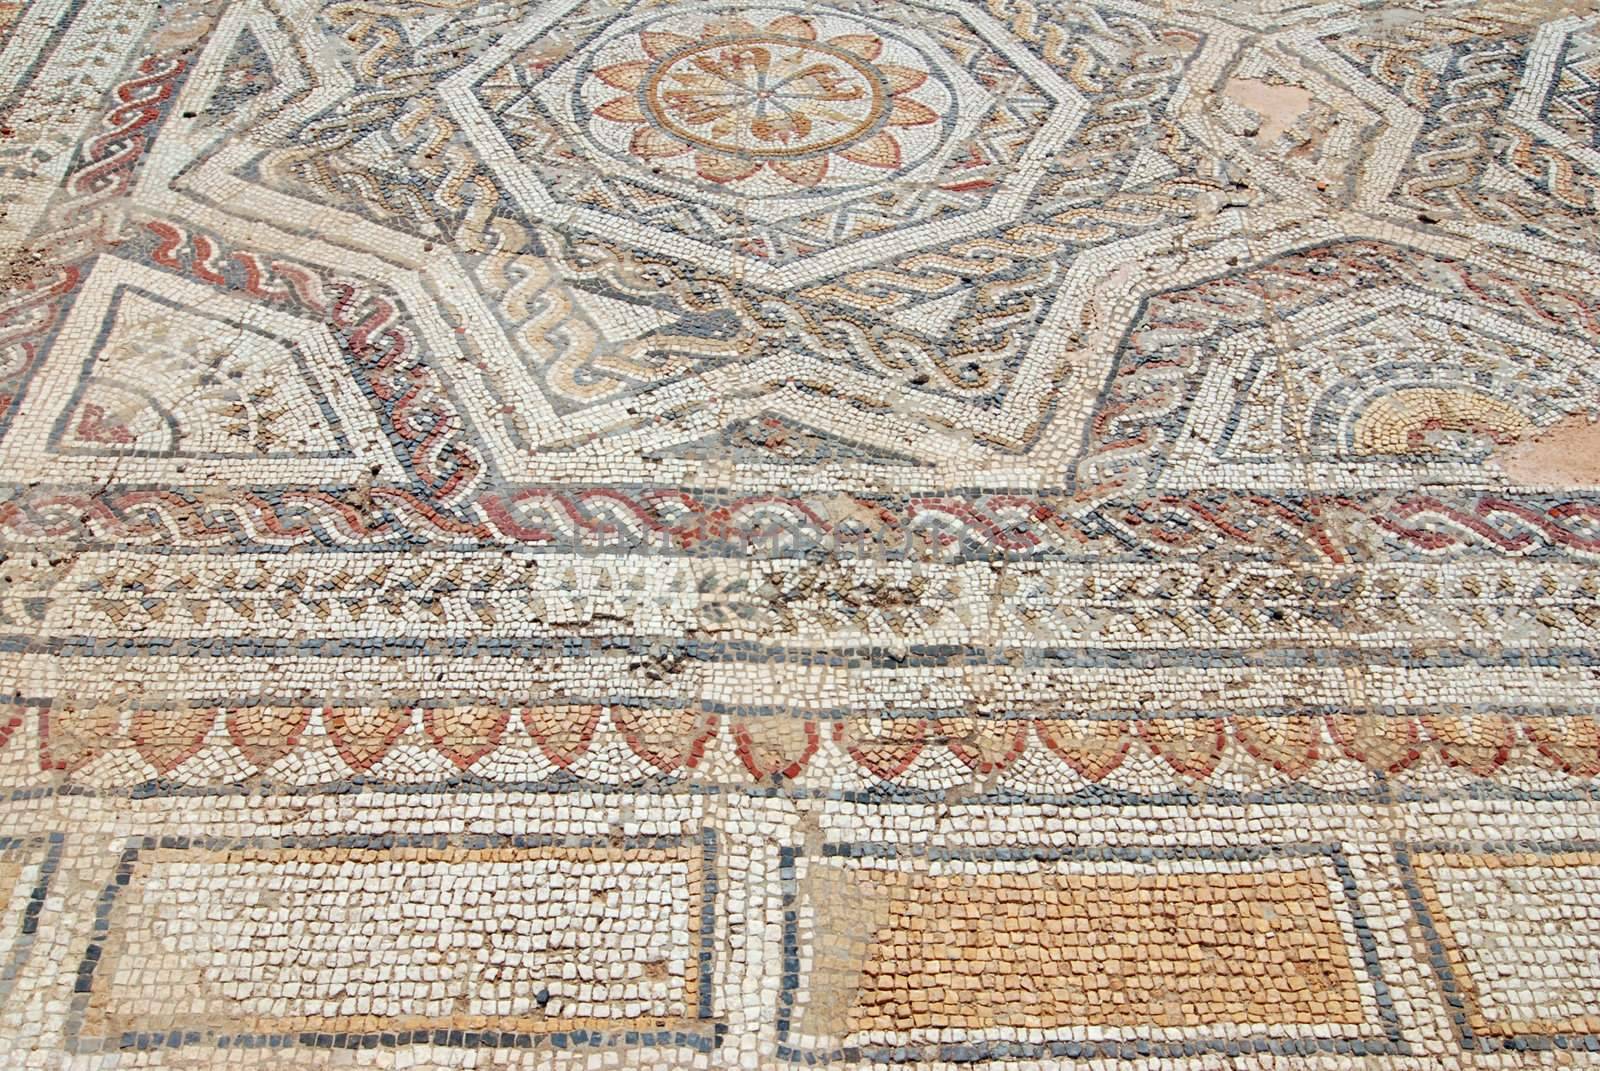 Ancient roman mosaic from the Sardinian town of Nora